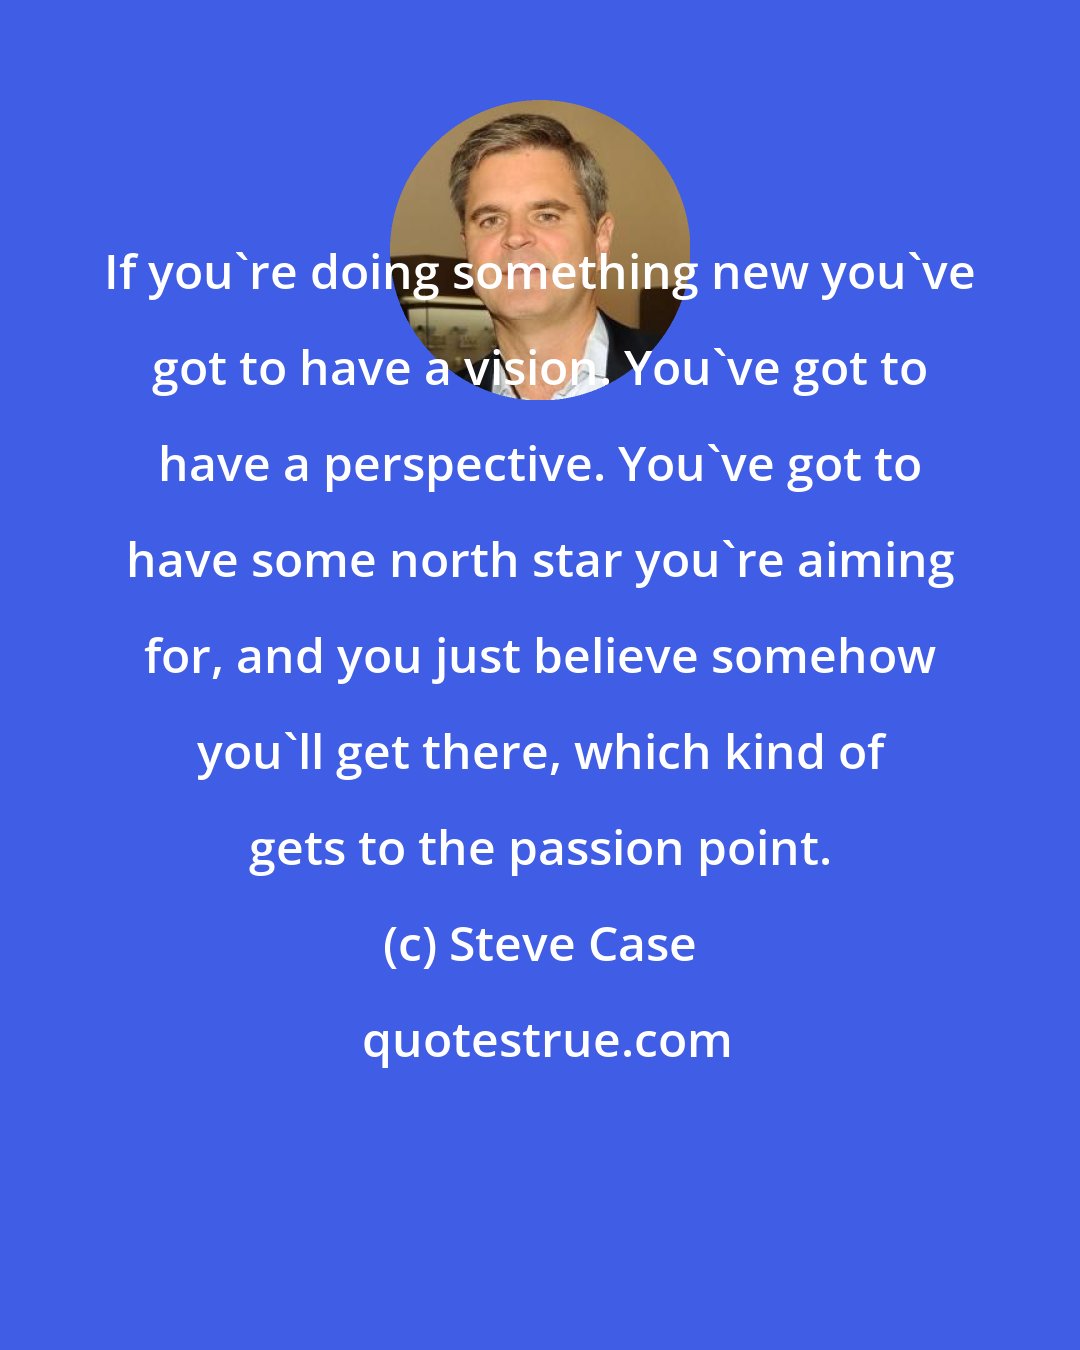 Steve Case: If you're doing something new you've got to have a vision. You've got to have a perspective. You've got to have some north star you're aiming for, and you just believe somehow you'll get there, which kind of gets to the passion point.